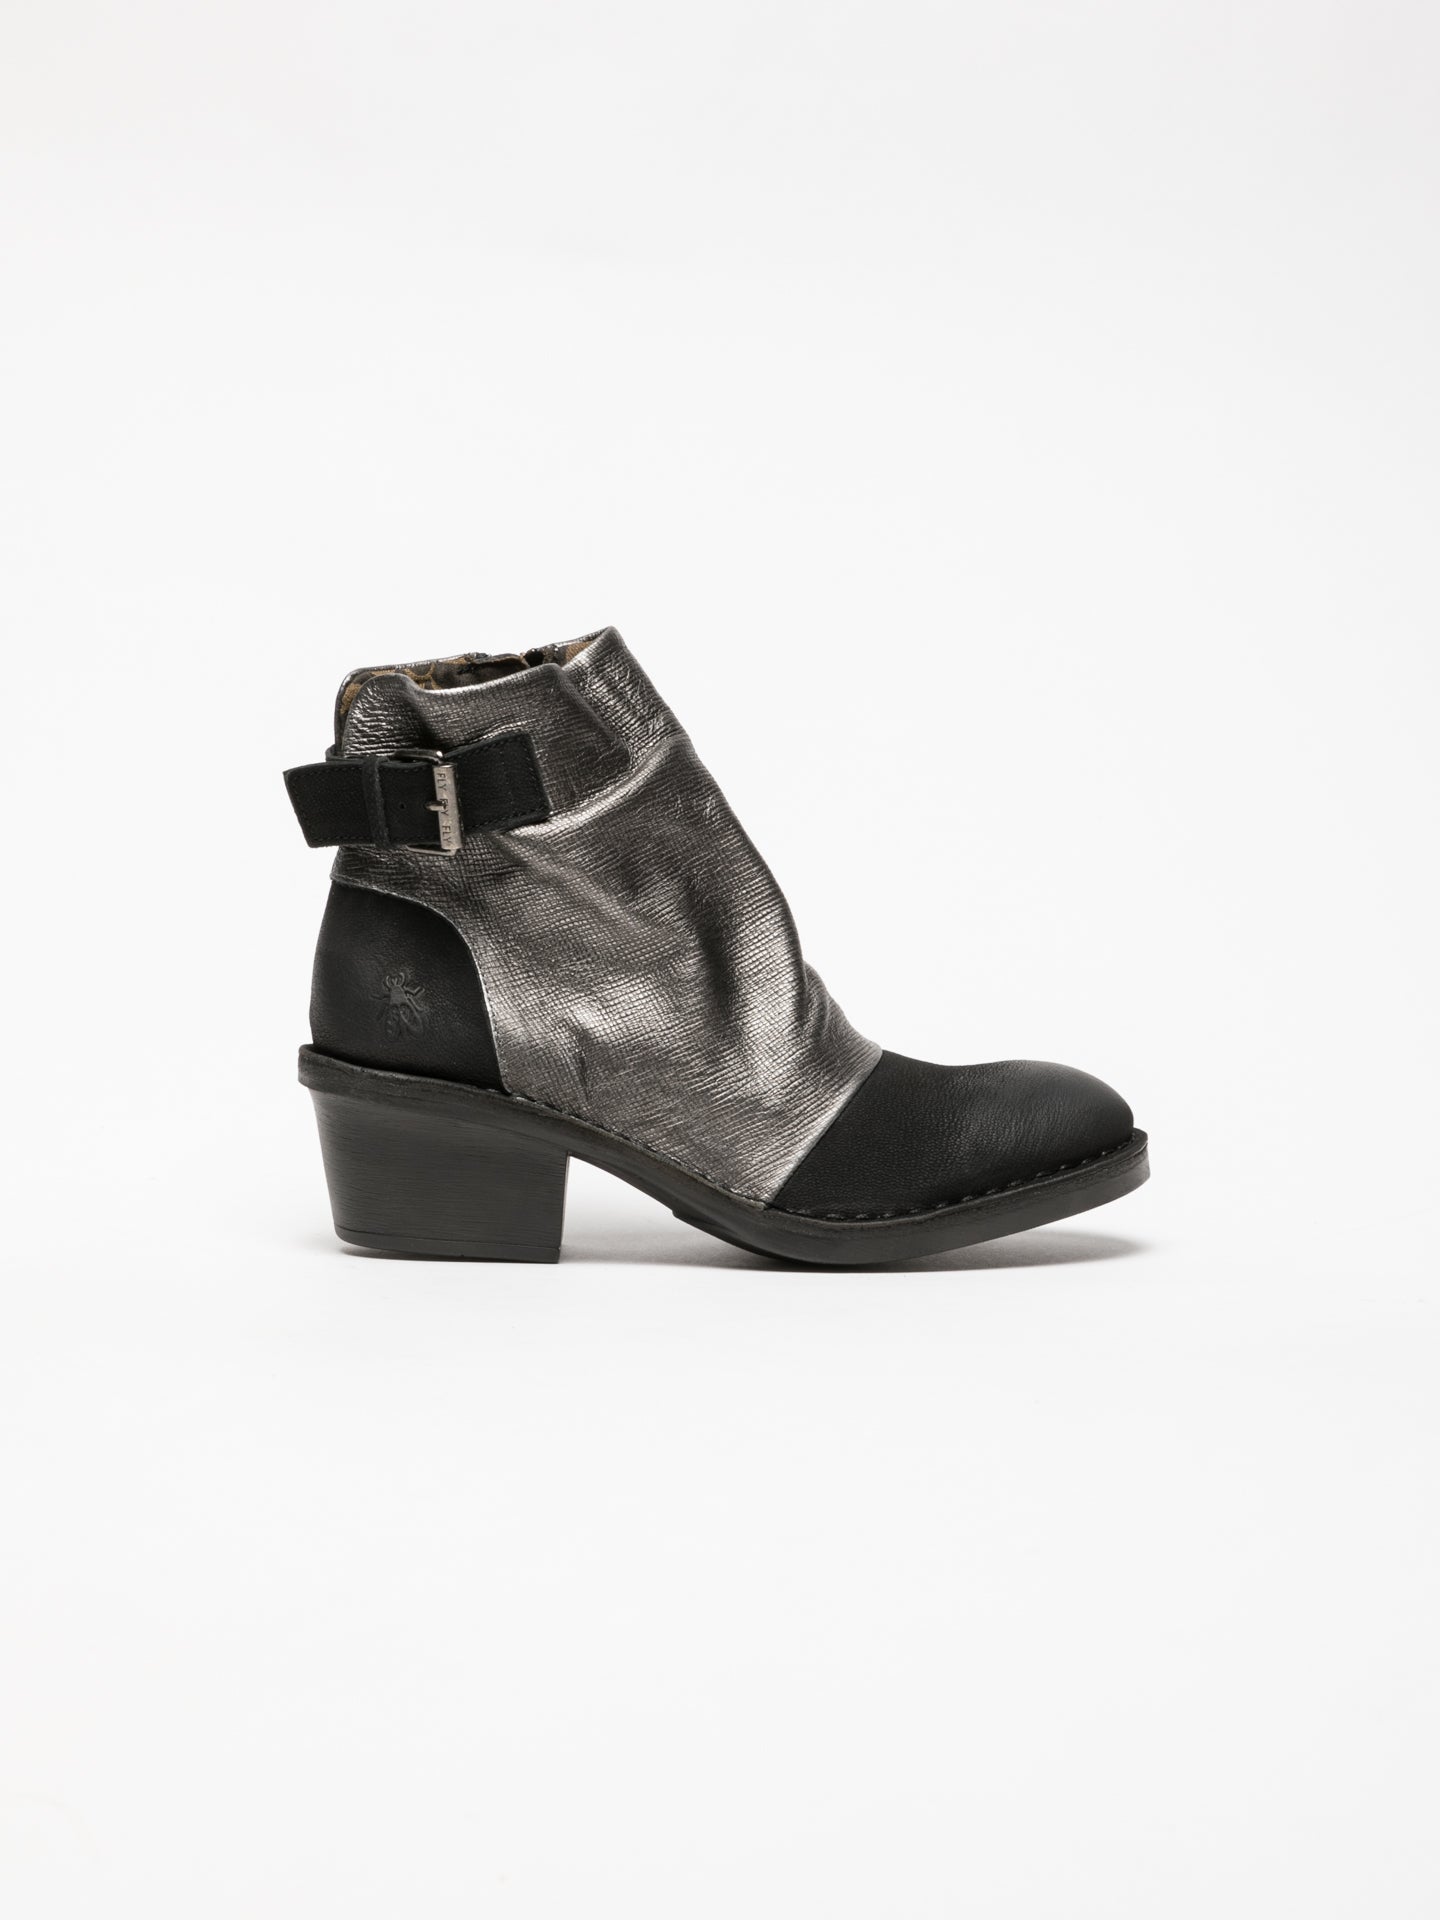 Fly London Silver Buckle Ankle Boots